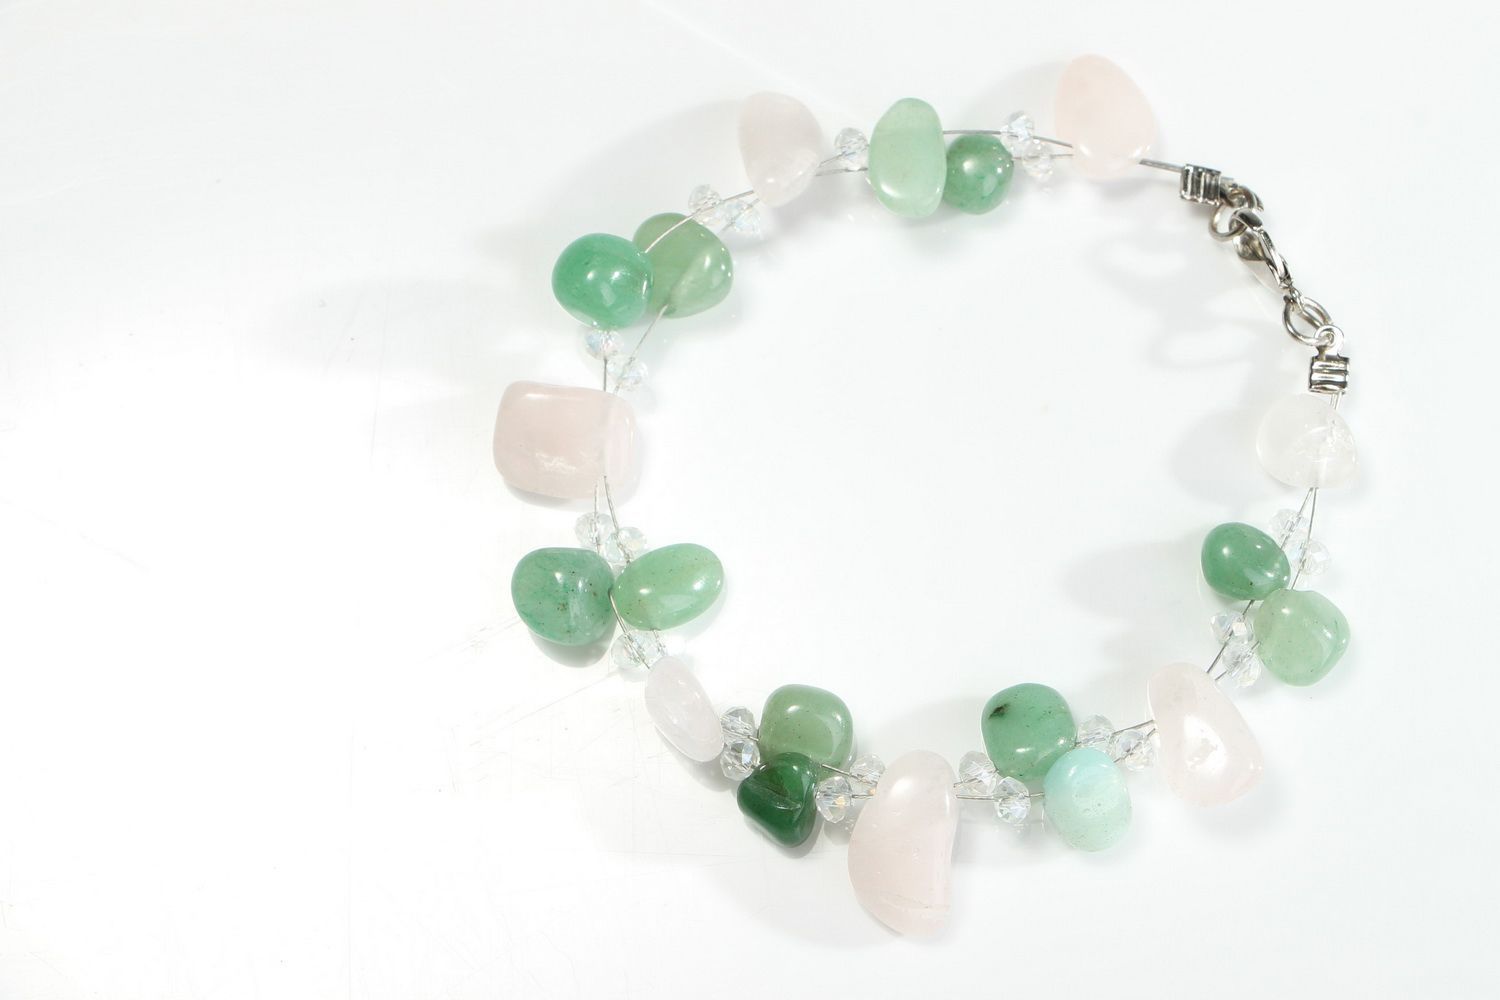 Homemade bracelet with natural stones photo 1